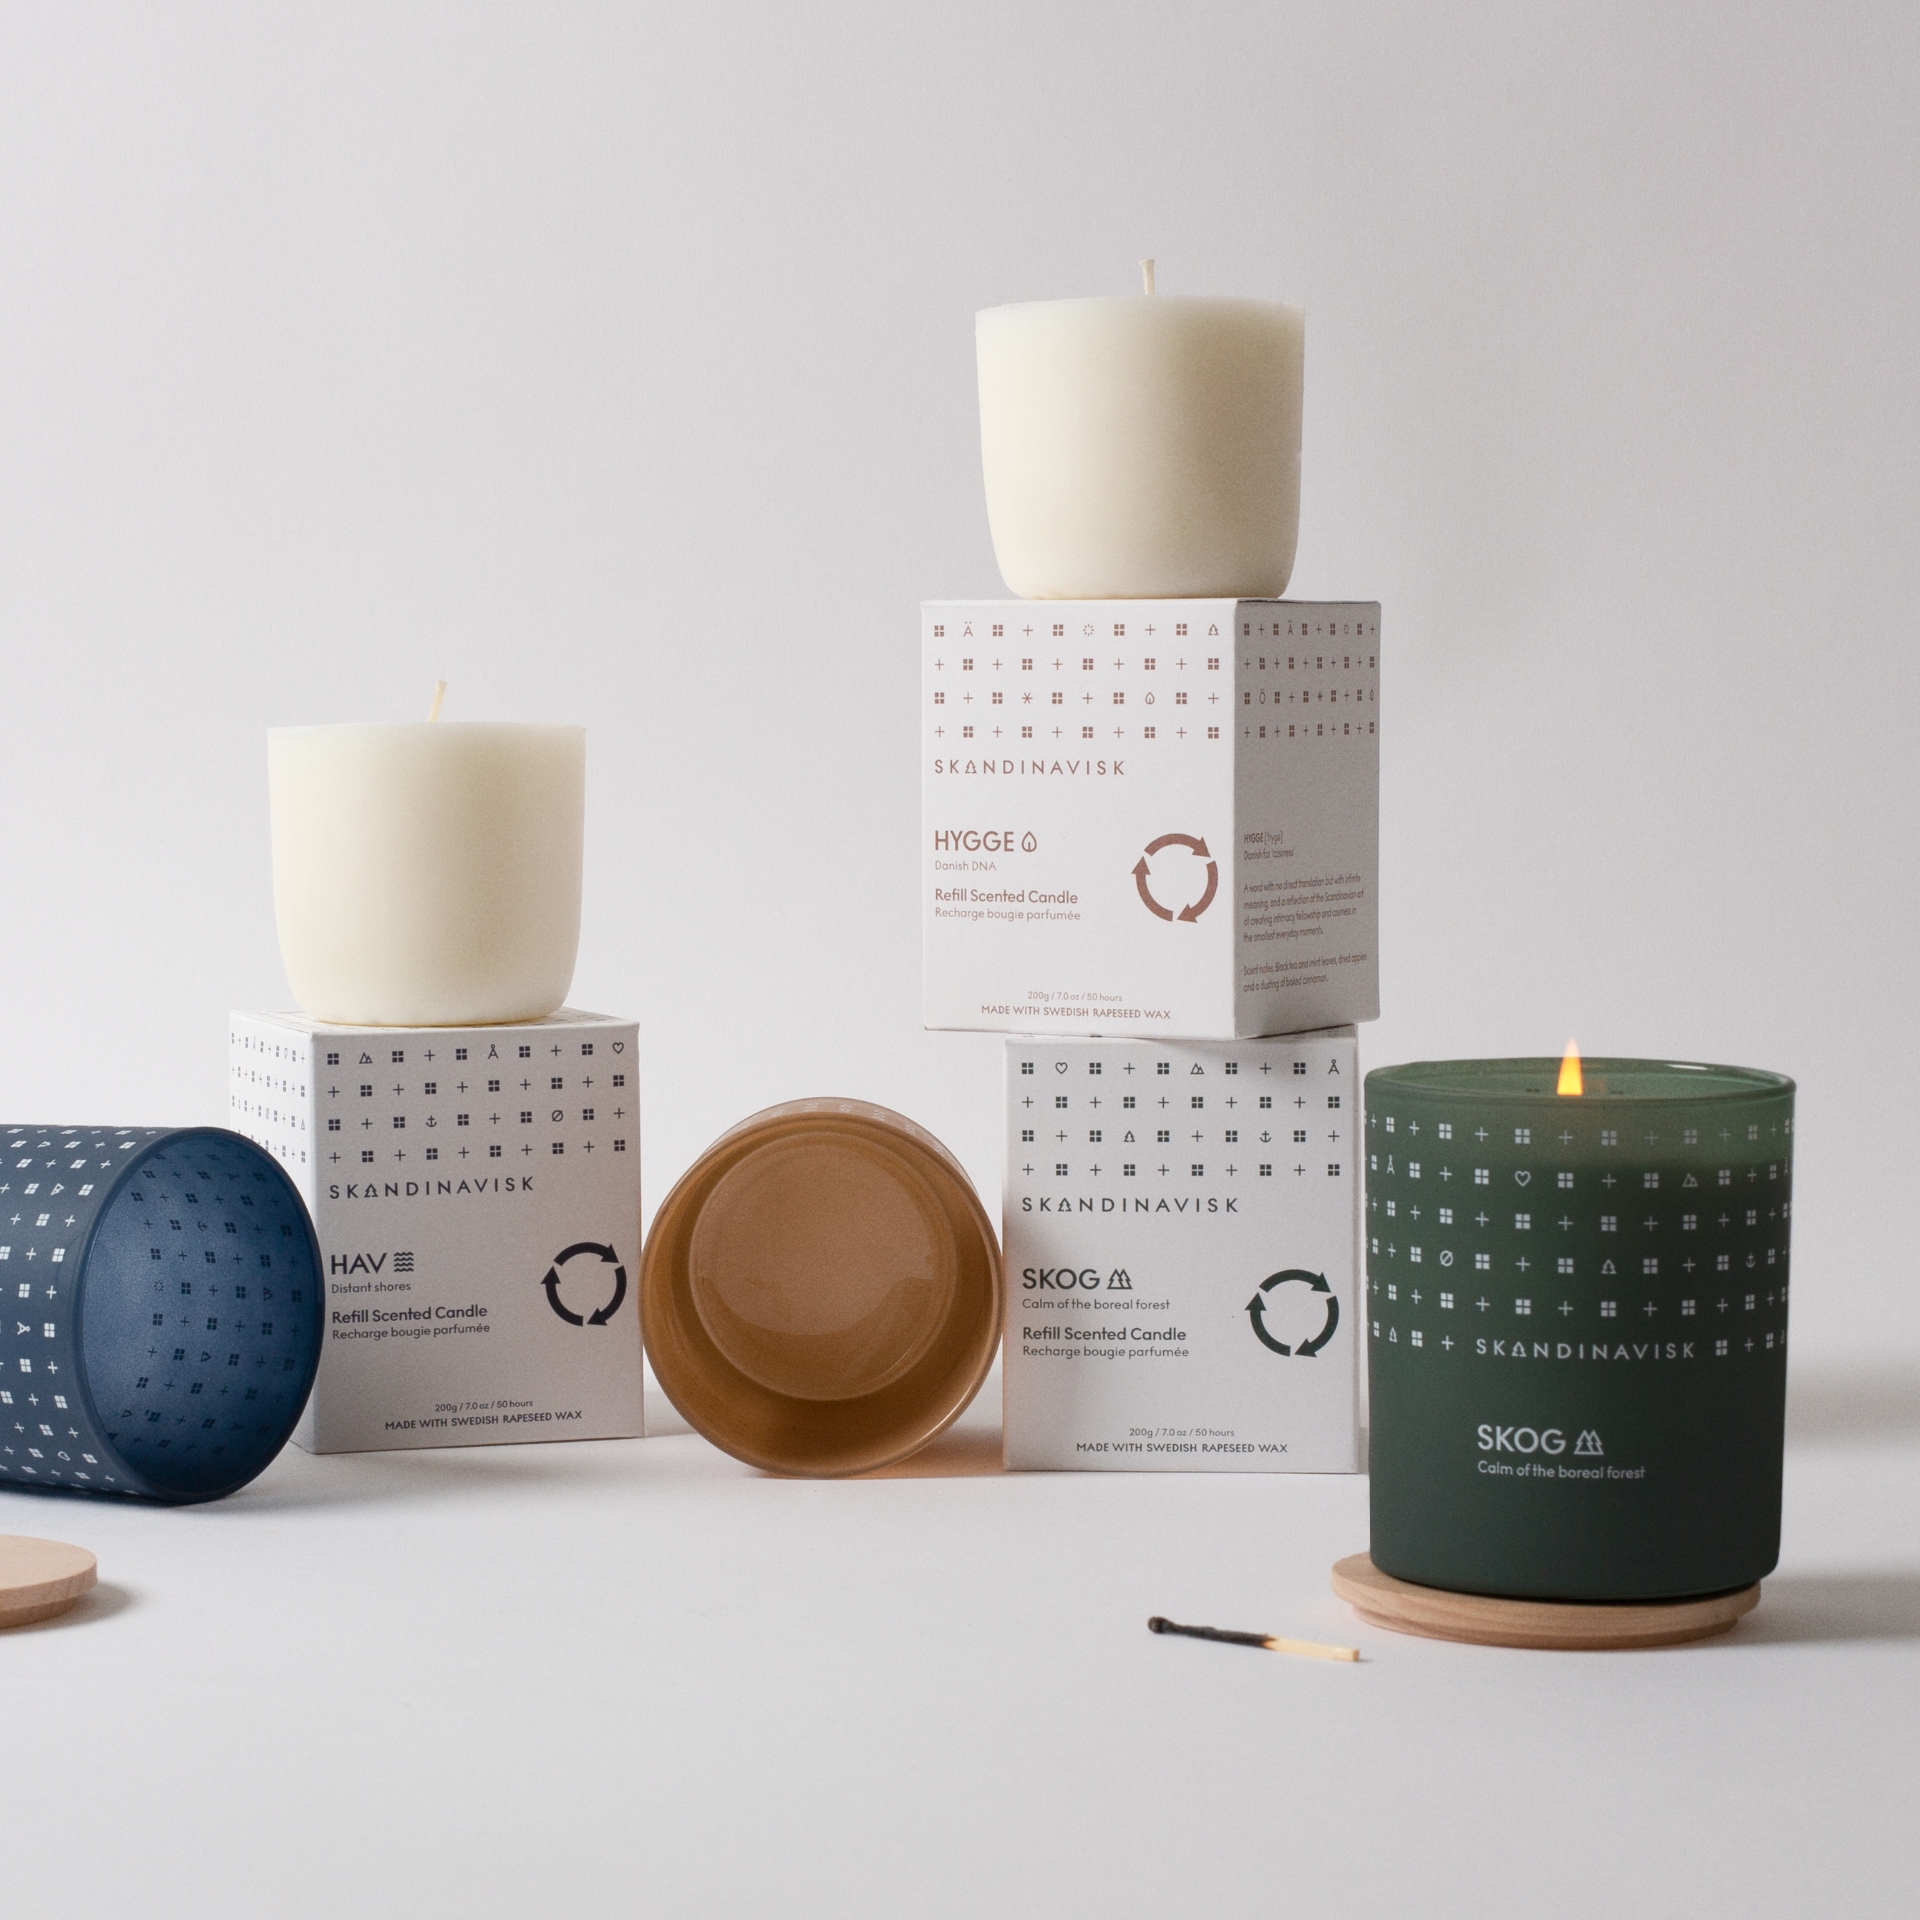 fjord-scented-candle-refill